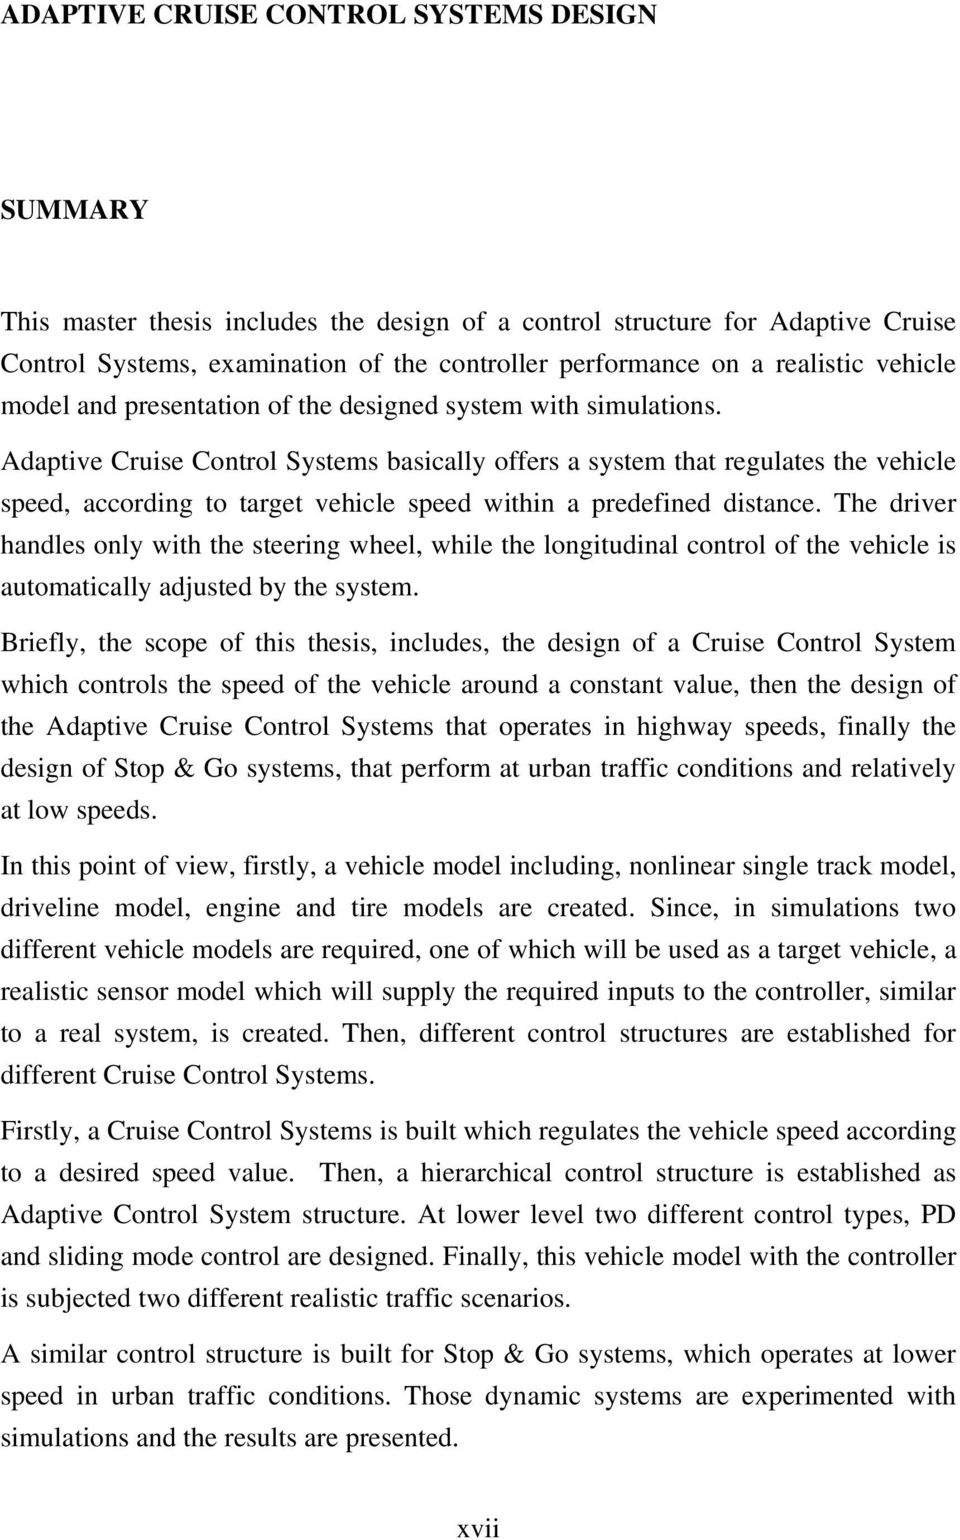 Adaptive Cruise Control Systems basically offers a system that regulates the vehicle speed, according to target vehicle speed within a predefined distance.